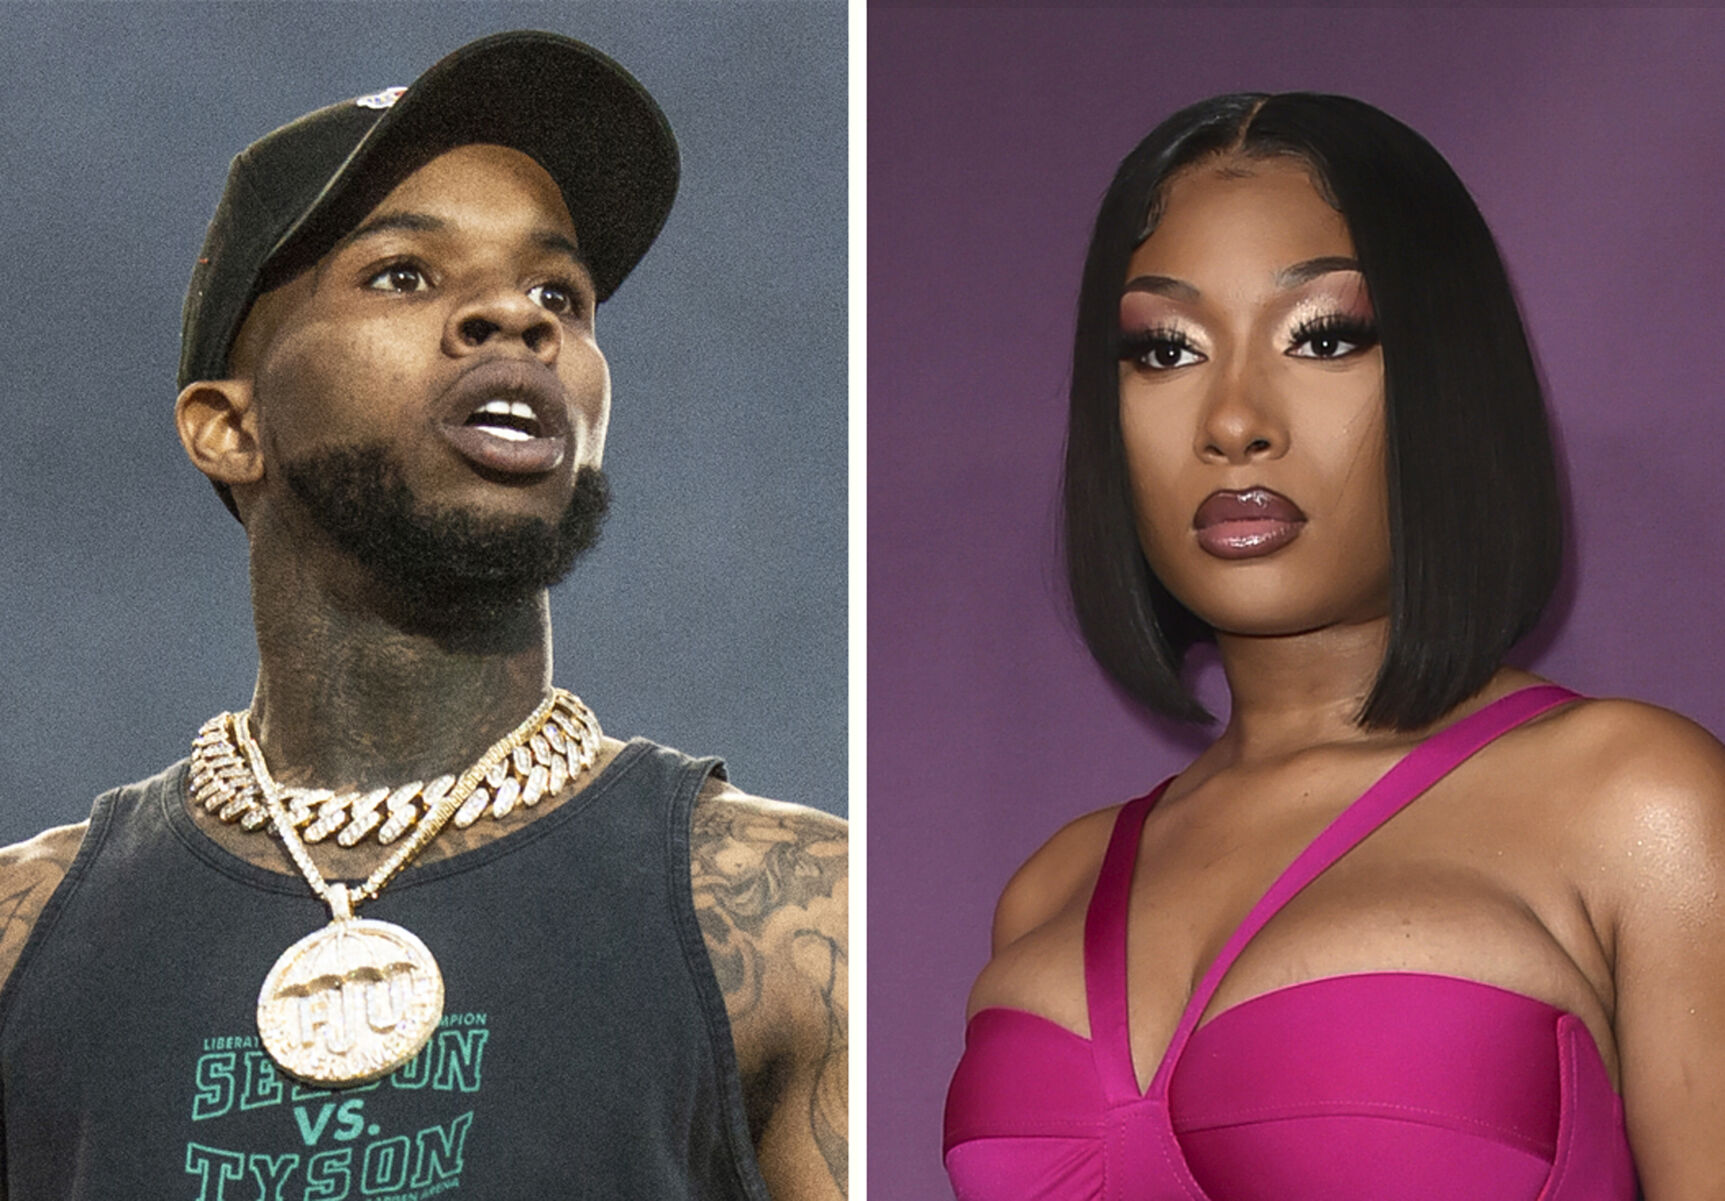 Tory Lanez found guilty in Megan Thee Stallion case, Salt Bae banned from events after World Cup, and more celeb news picture